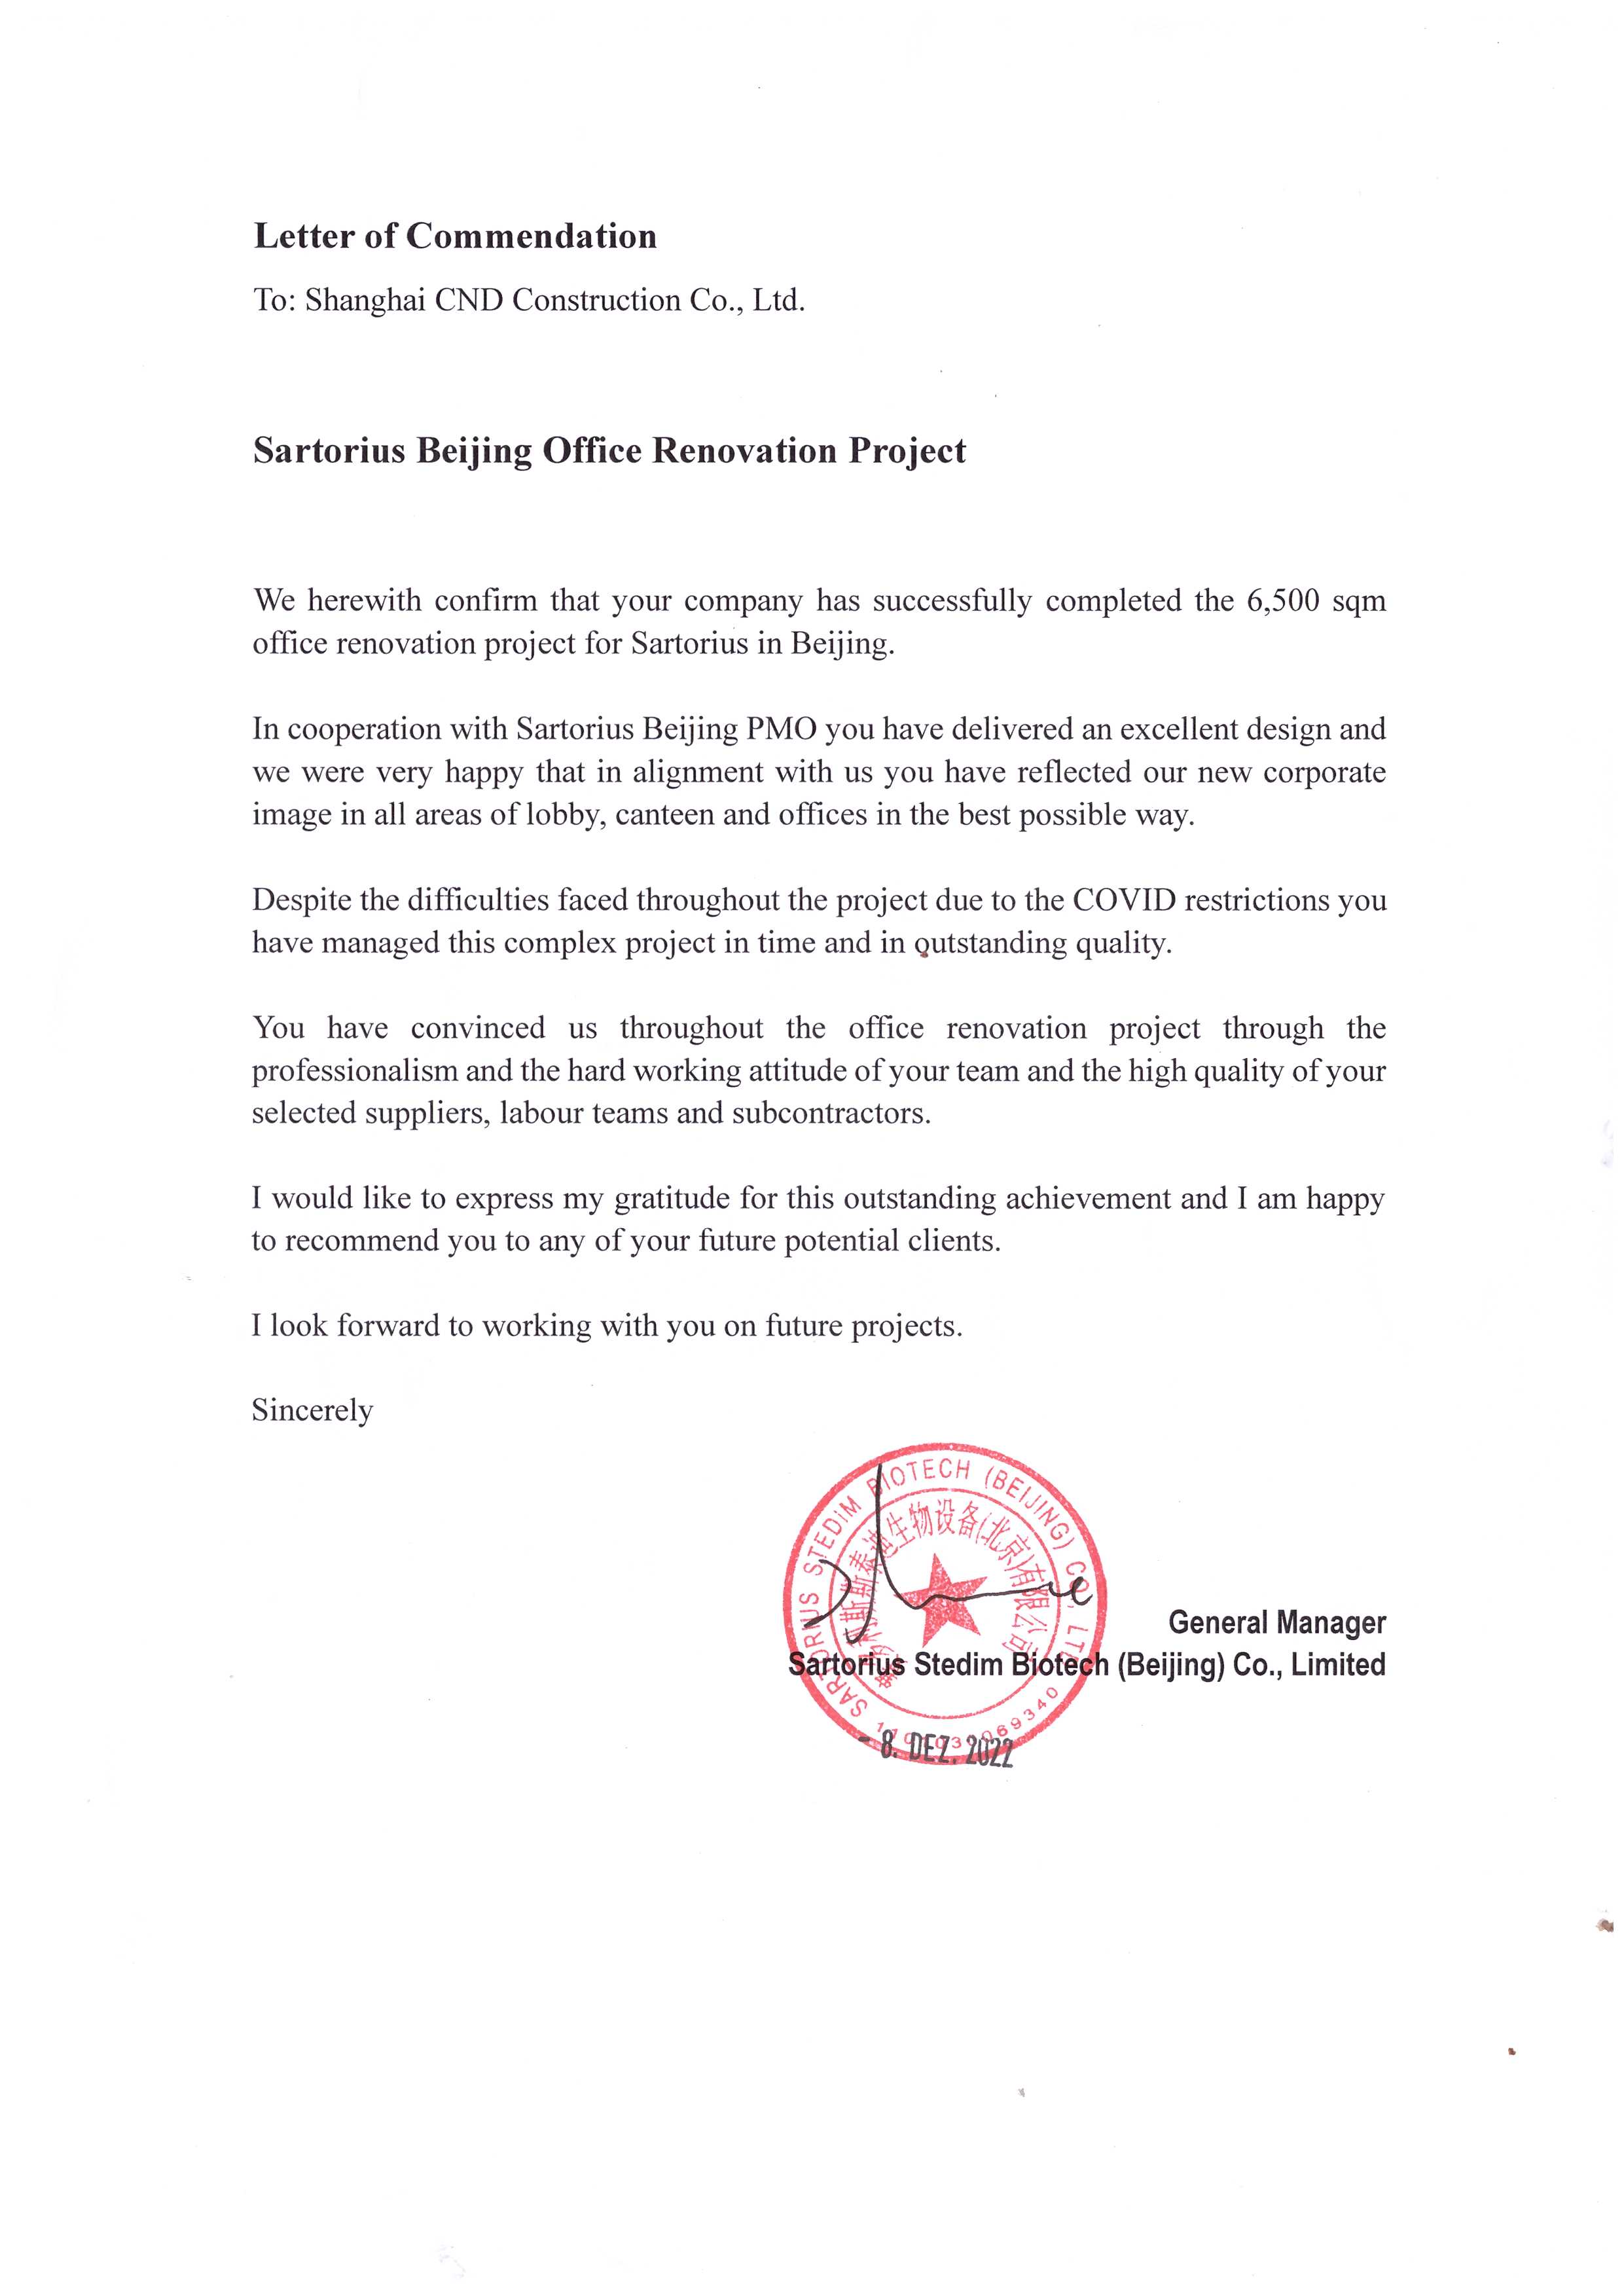 Letter of Commendation to CND by SARTORIUS 20221208